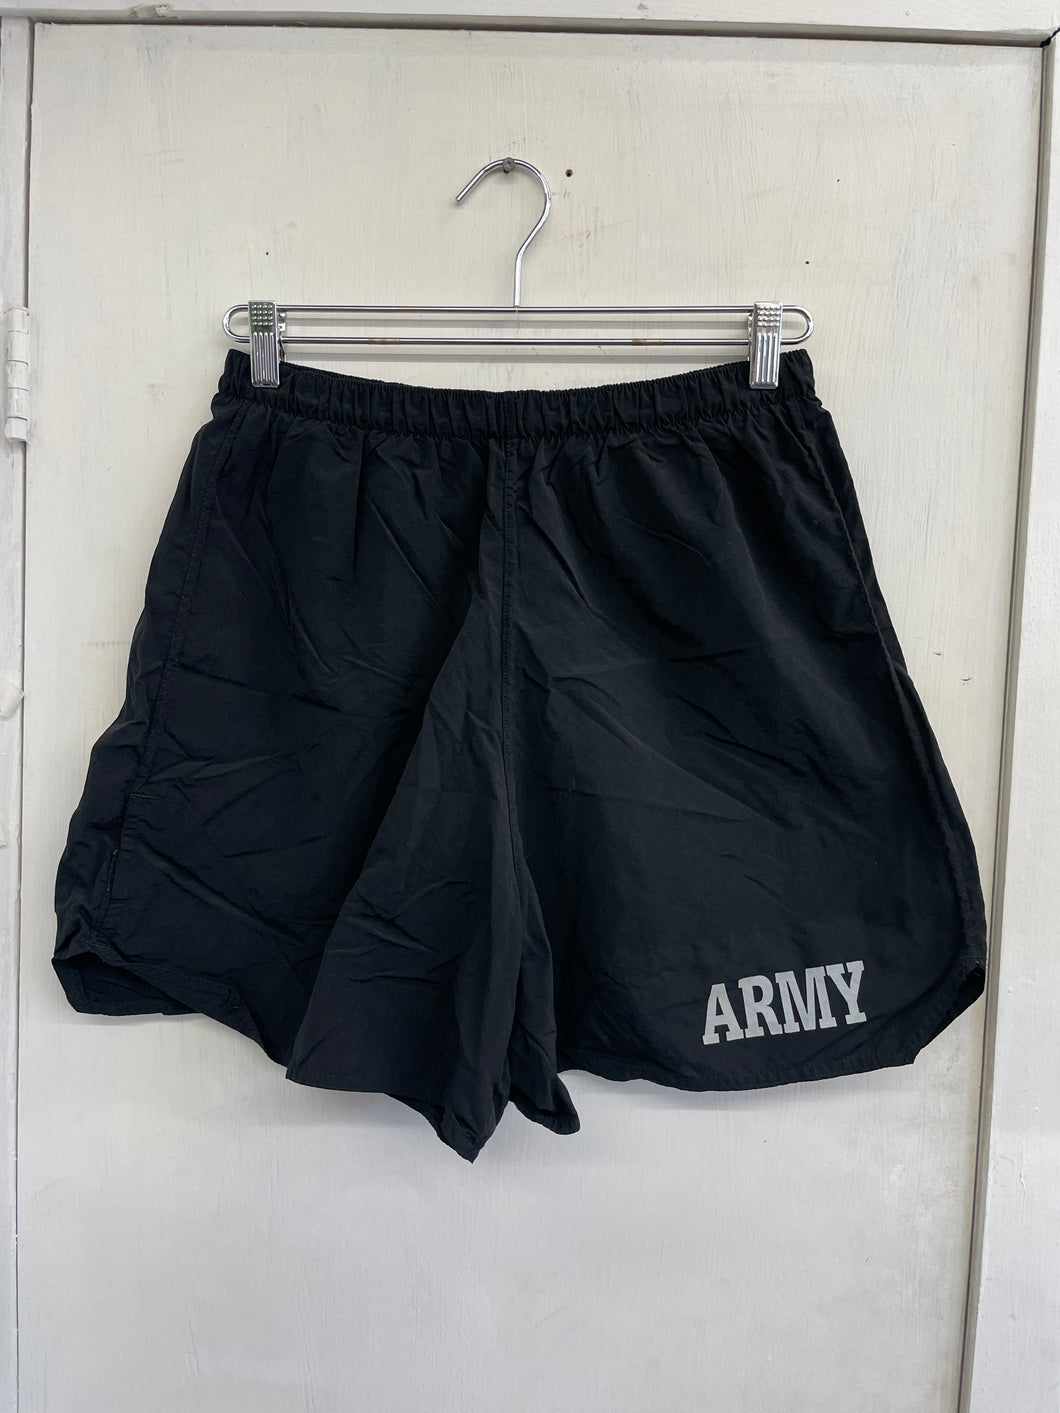 1990s US Army Trunks